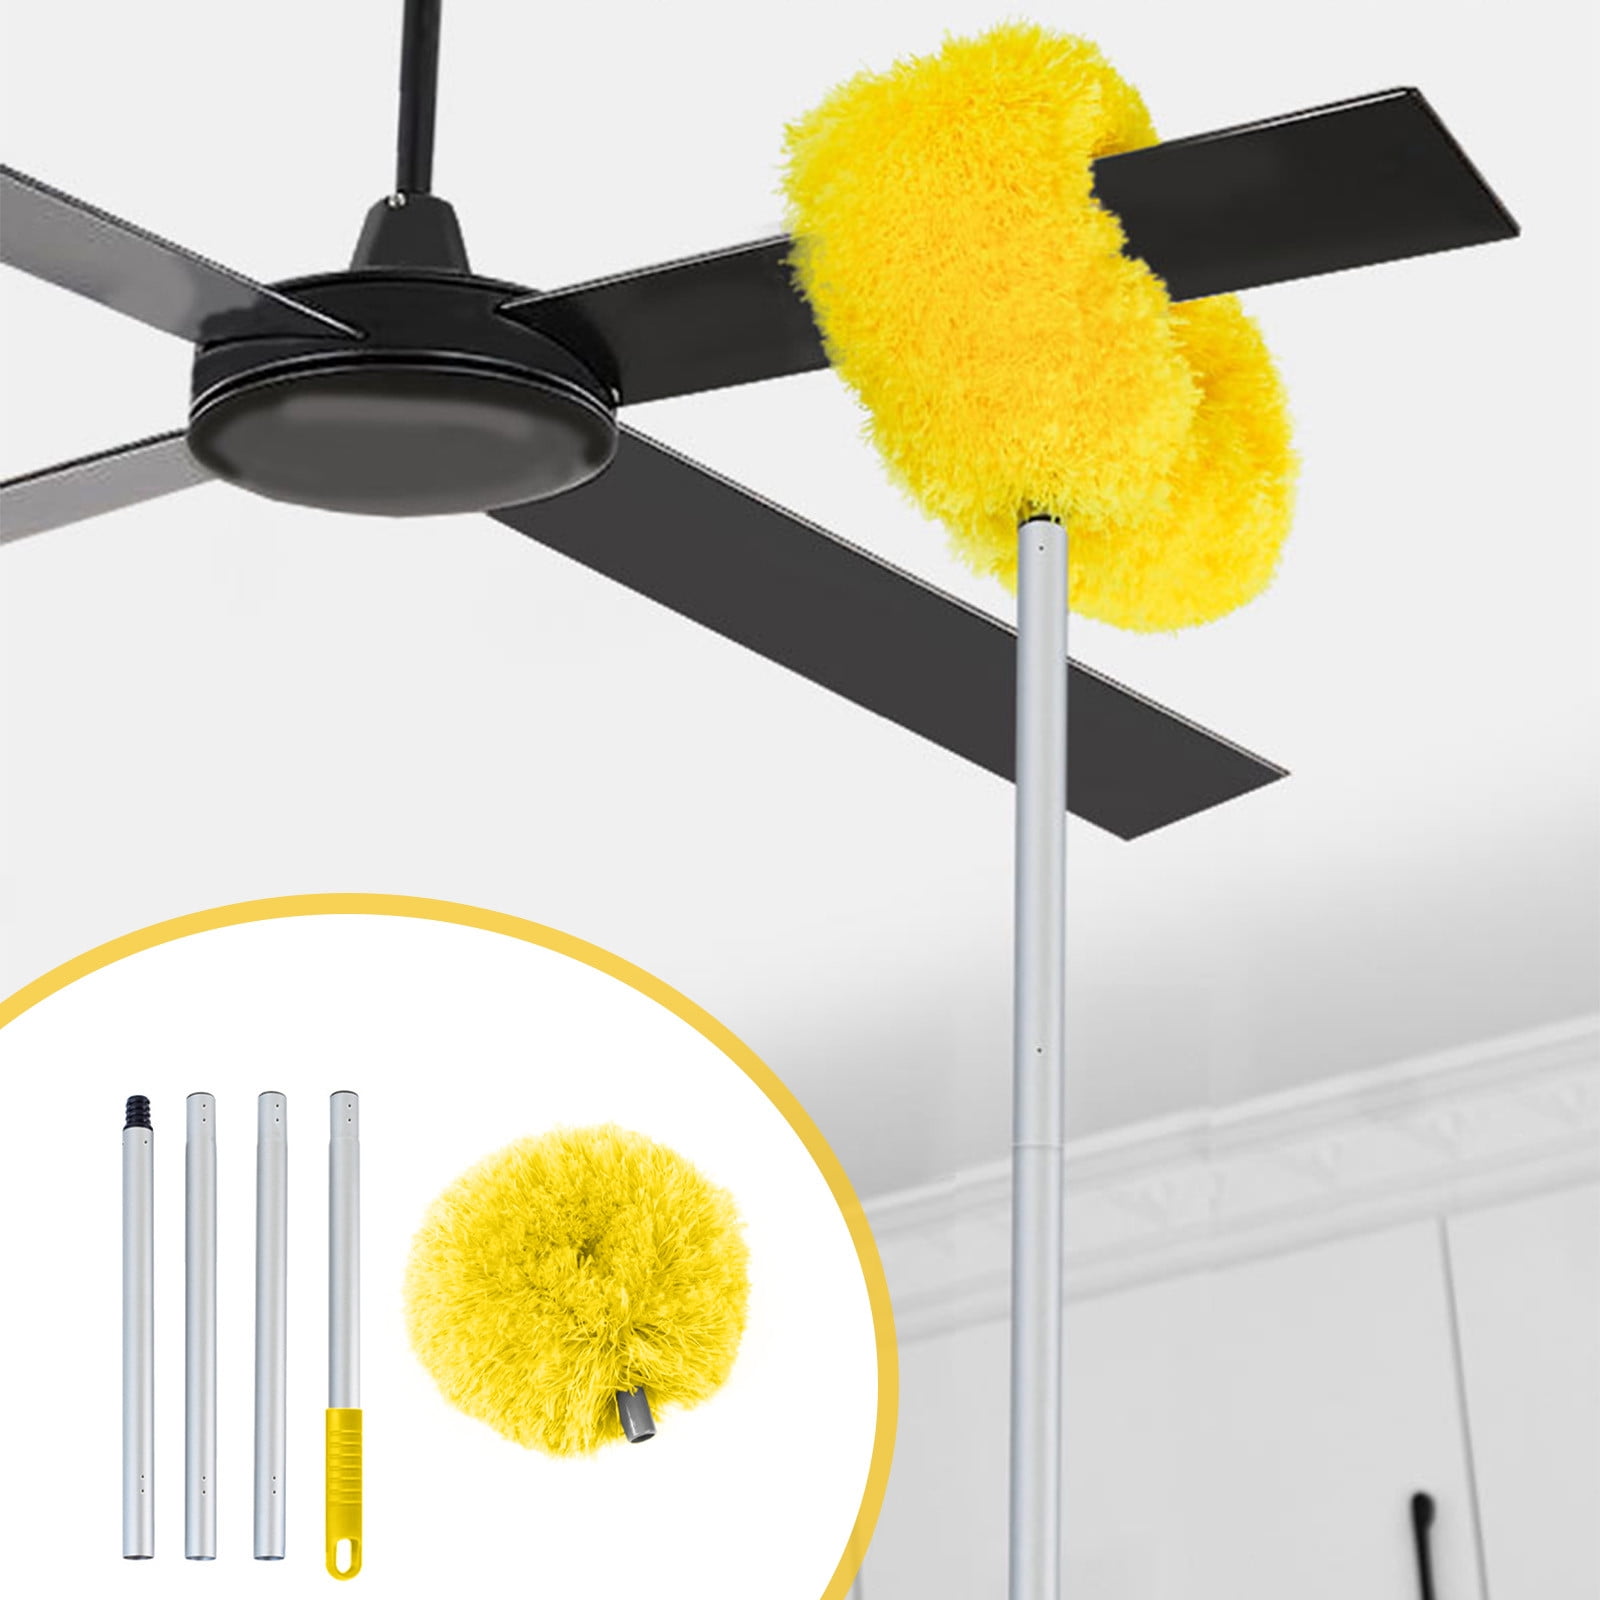 XEOVHV Ceiling Fan Duster,Dusters For Cleaning, Microfiber Duster With  Extension Pole 47 Inches, Duster For Cleaning Ceiling Fan, High Ceiling,  Furniture 